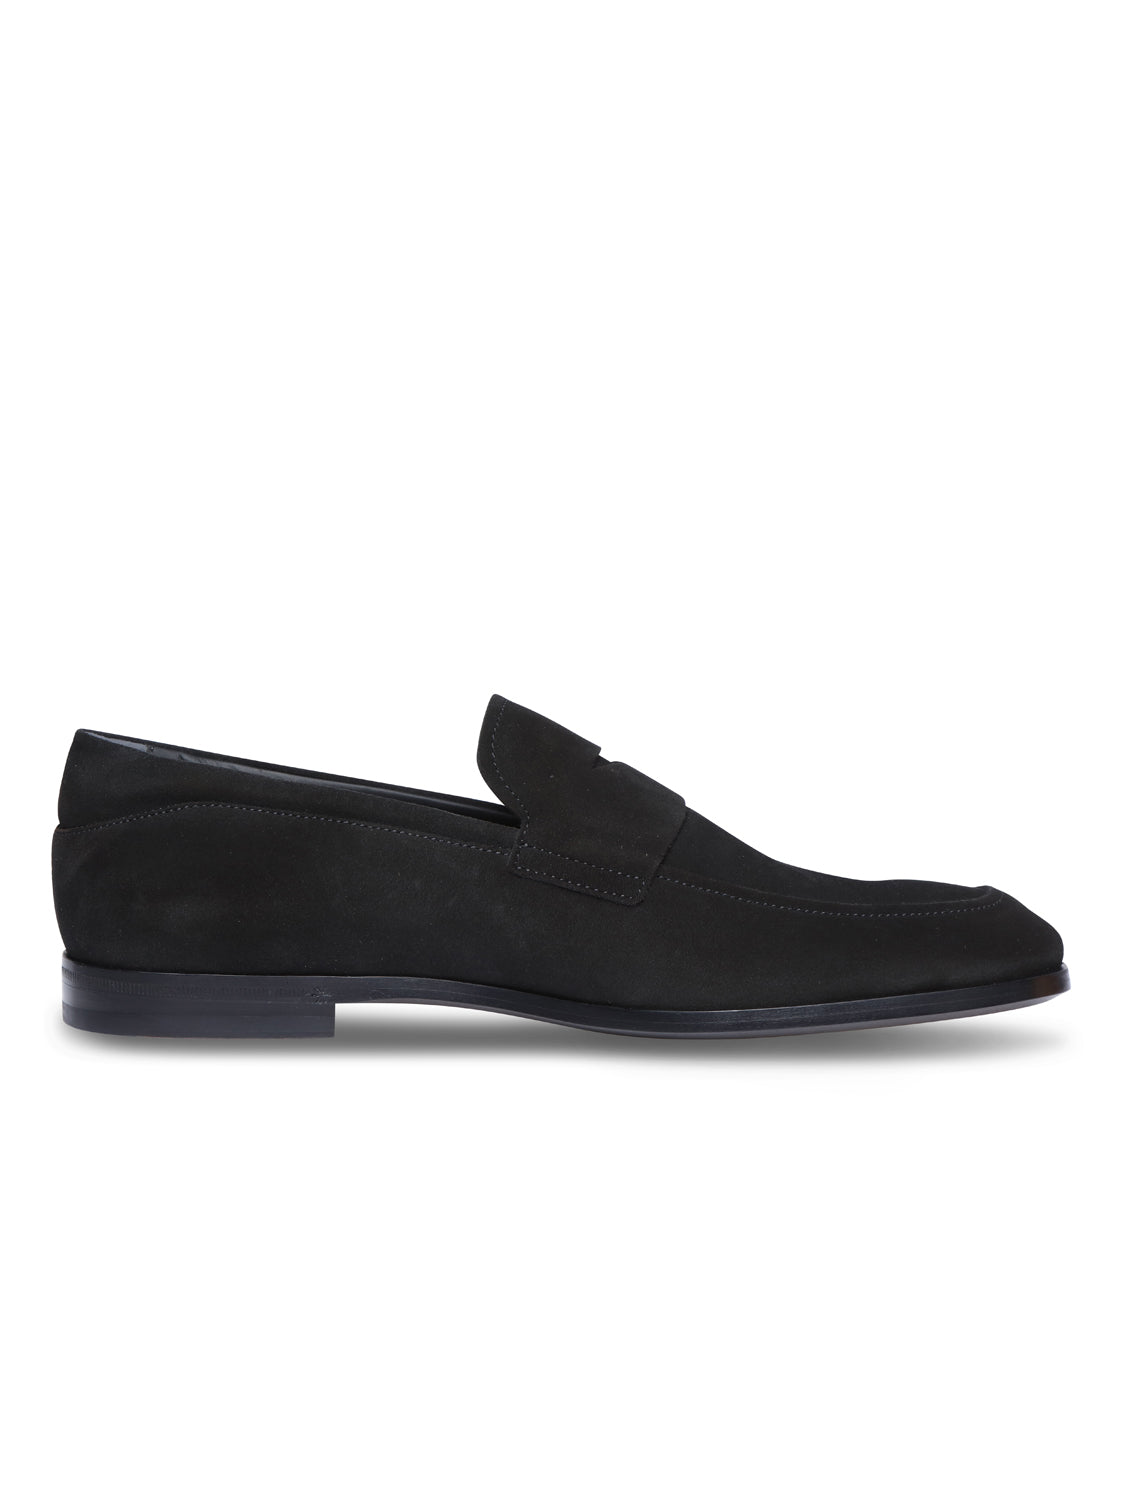 tod's black suede loafers